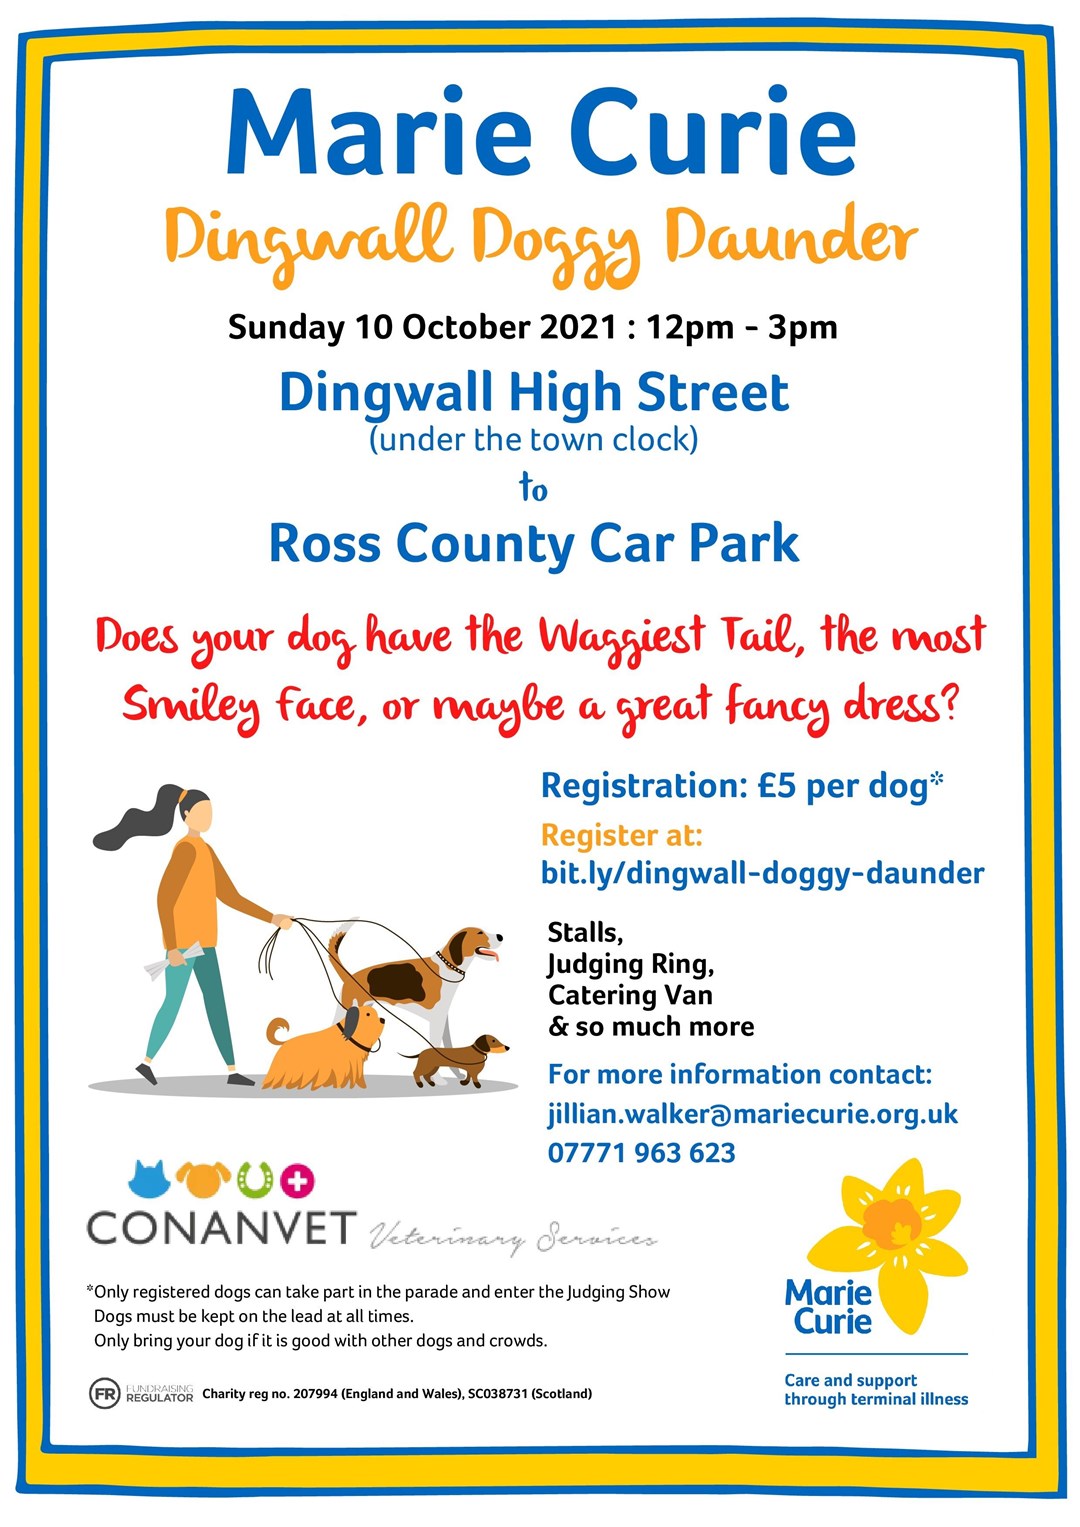 More details on the Dingwall Doggie Daunder.